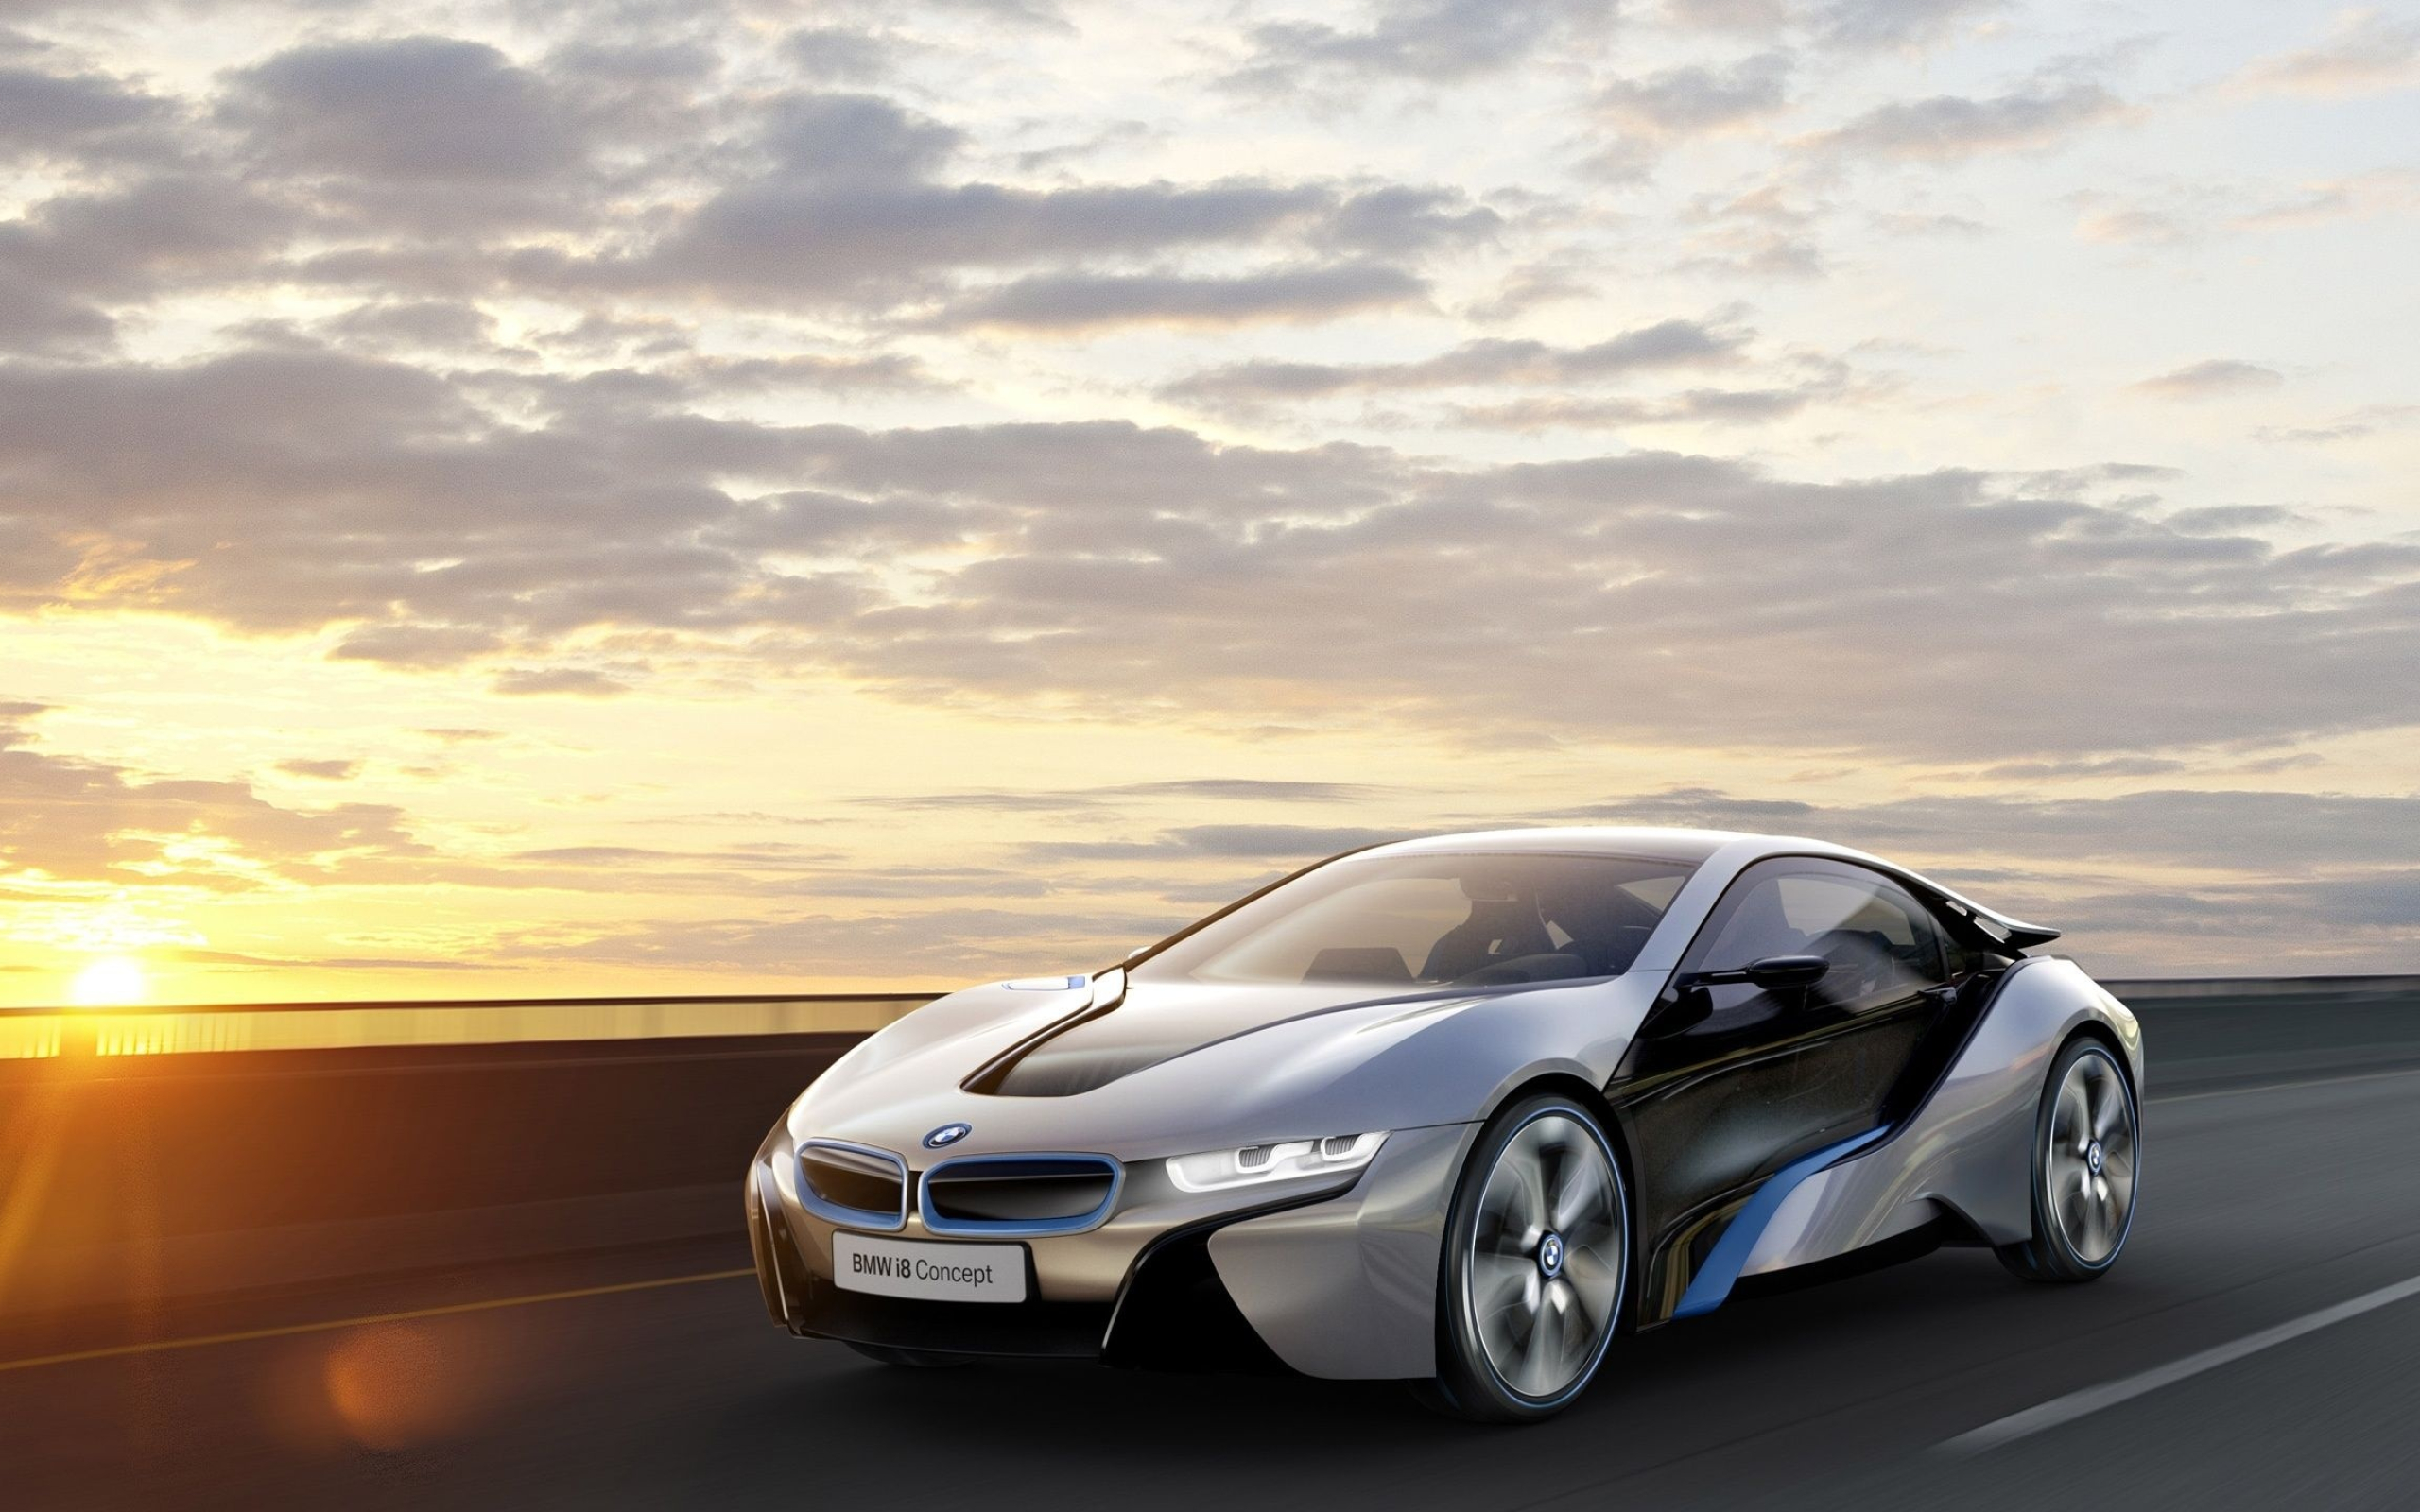 BMW i8, Stunning 4K wallpapers, Galleries of beauty, Automotive excellence, Unparalleled performance, 2560x1600 HD Desktop